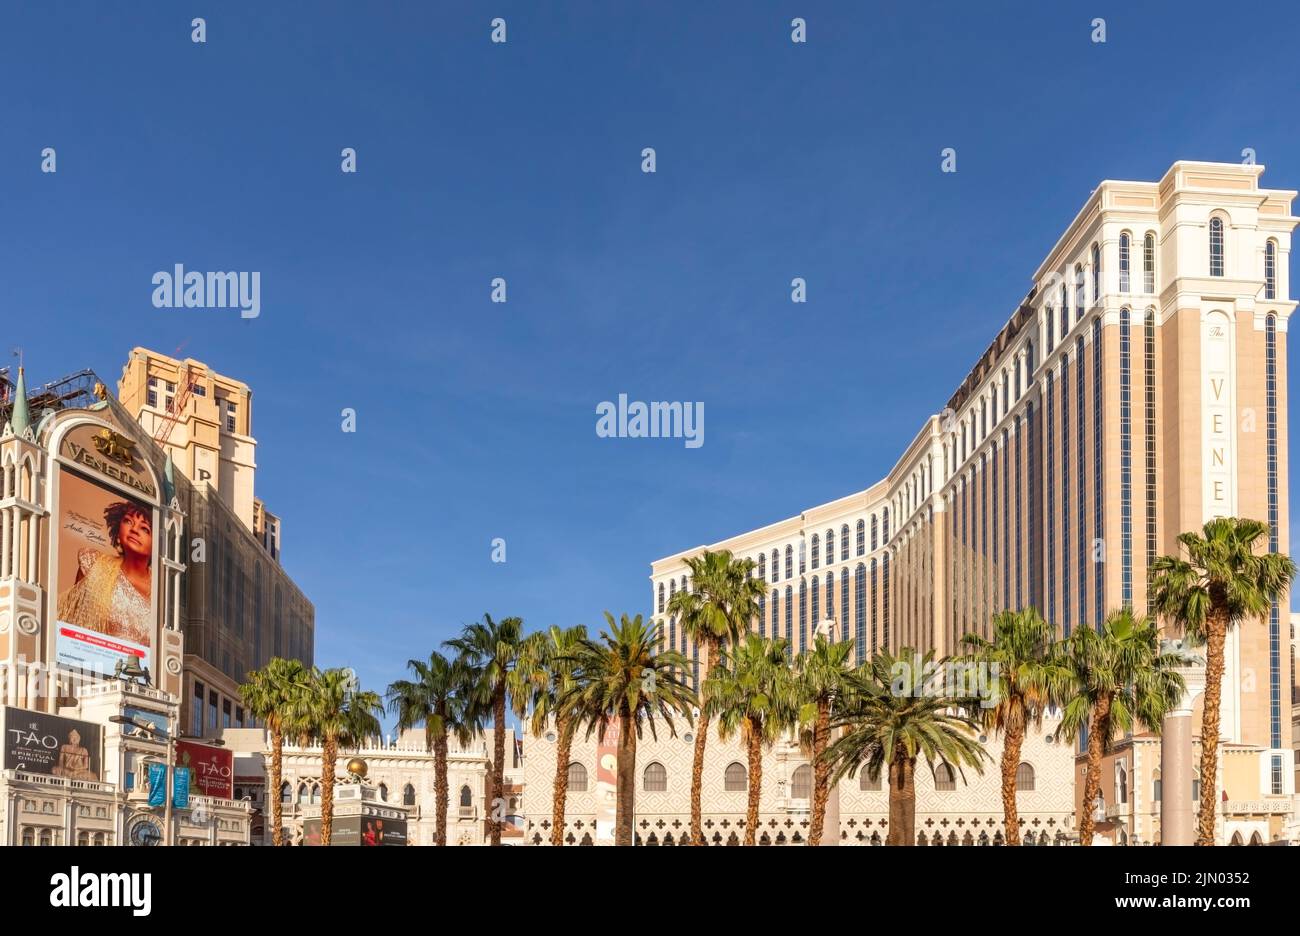 Las Vegas, USA - May 23, 2022: view of the Venetian Hotel and casino with palm trees in front. Stock Photo